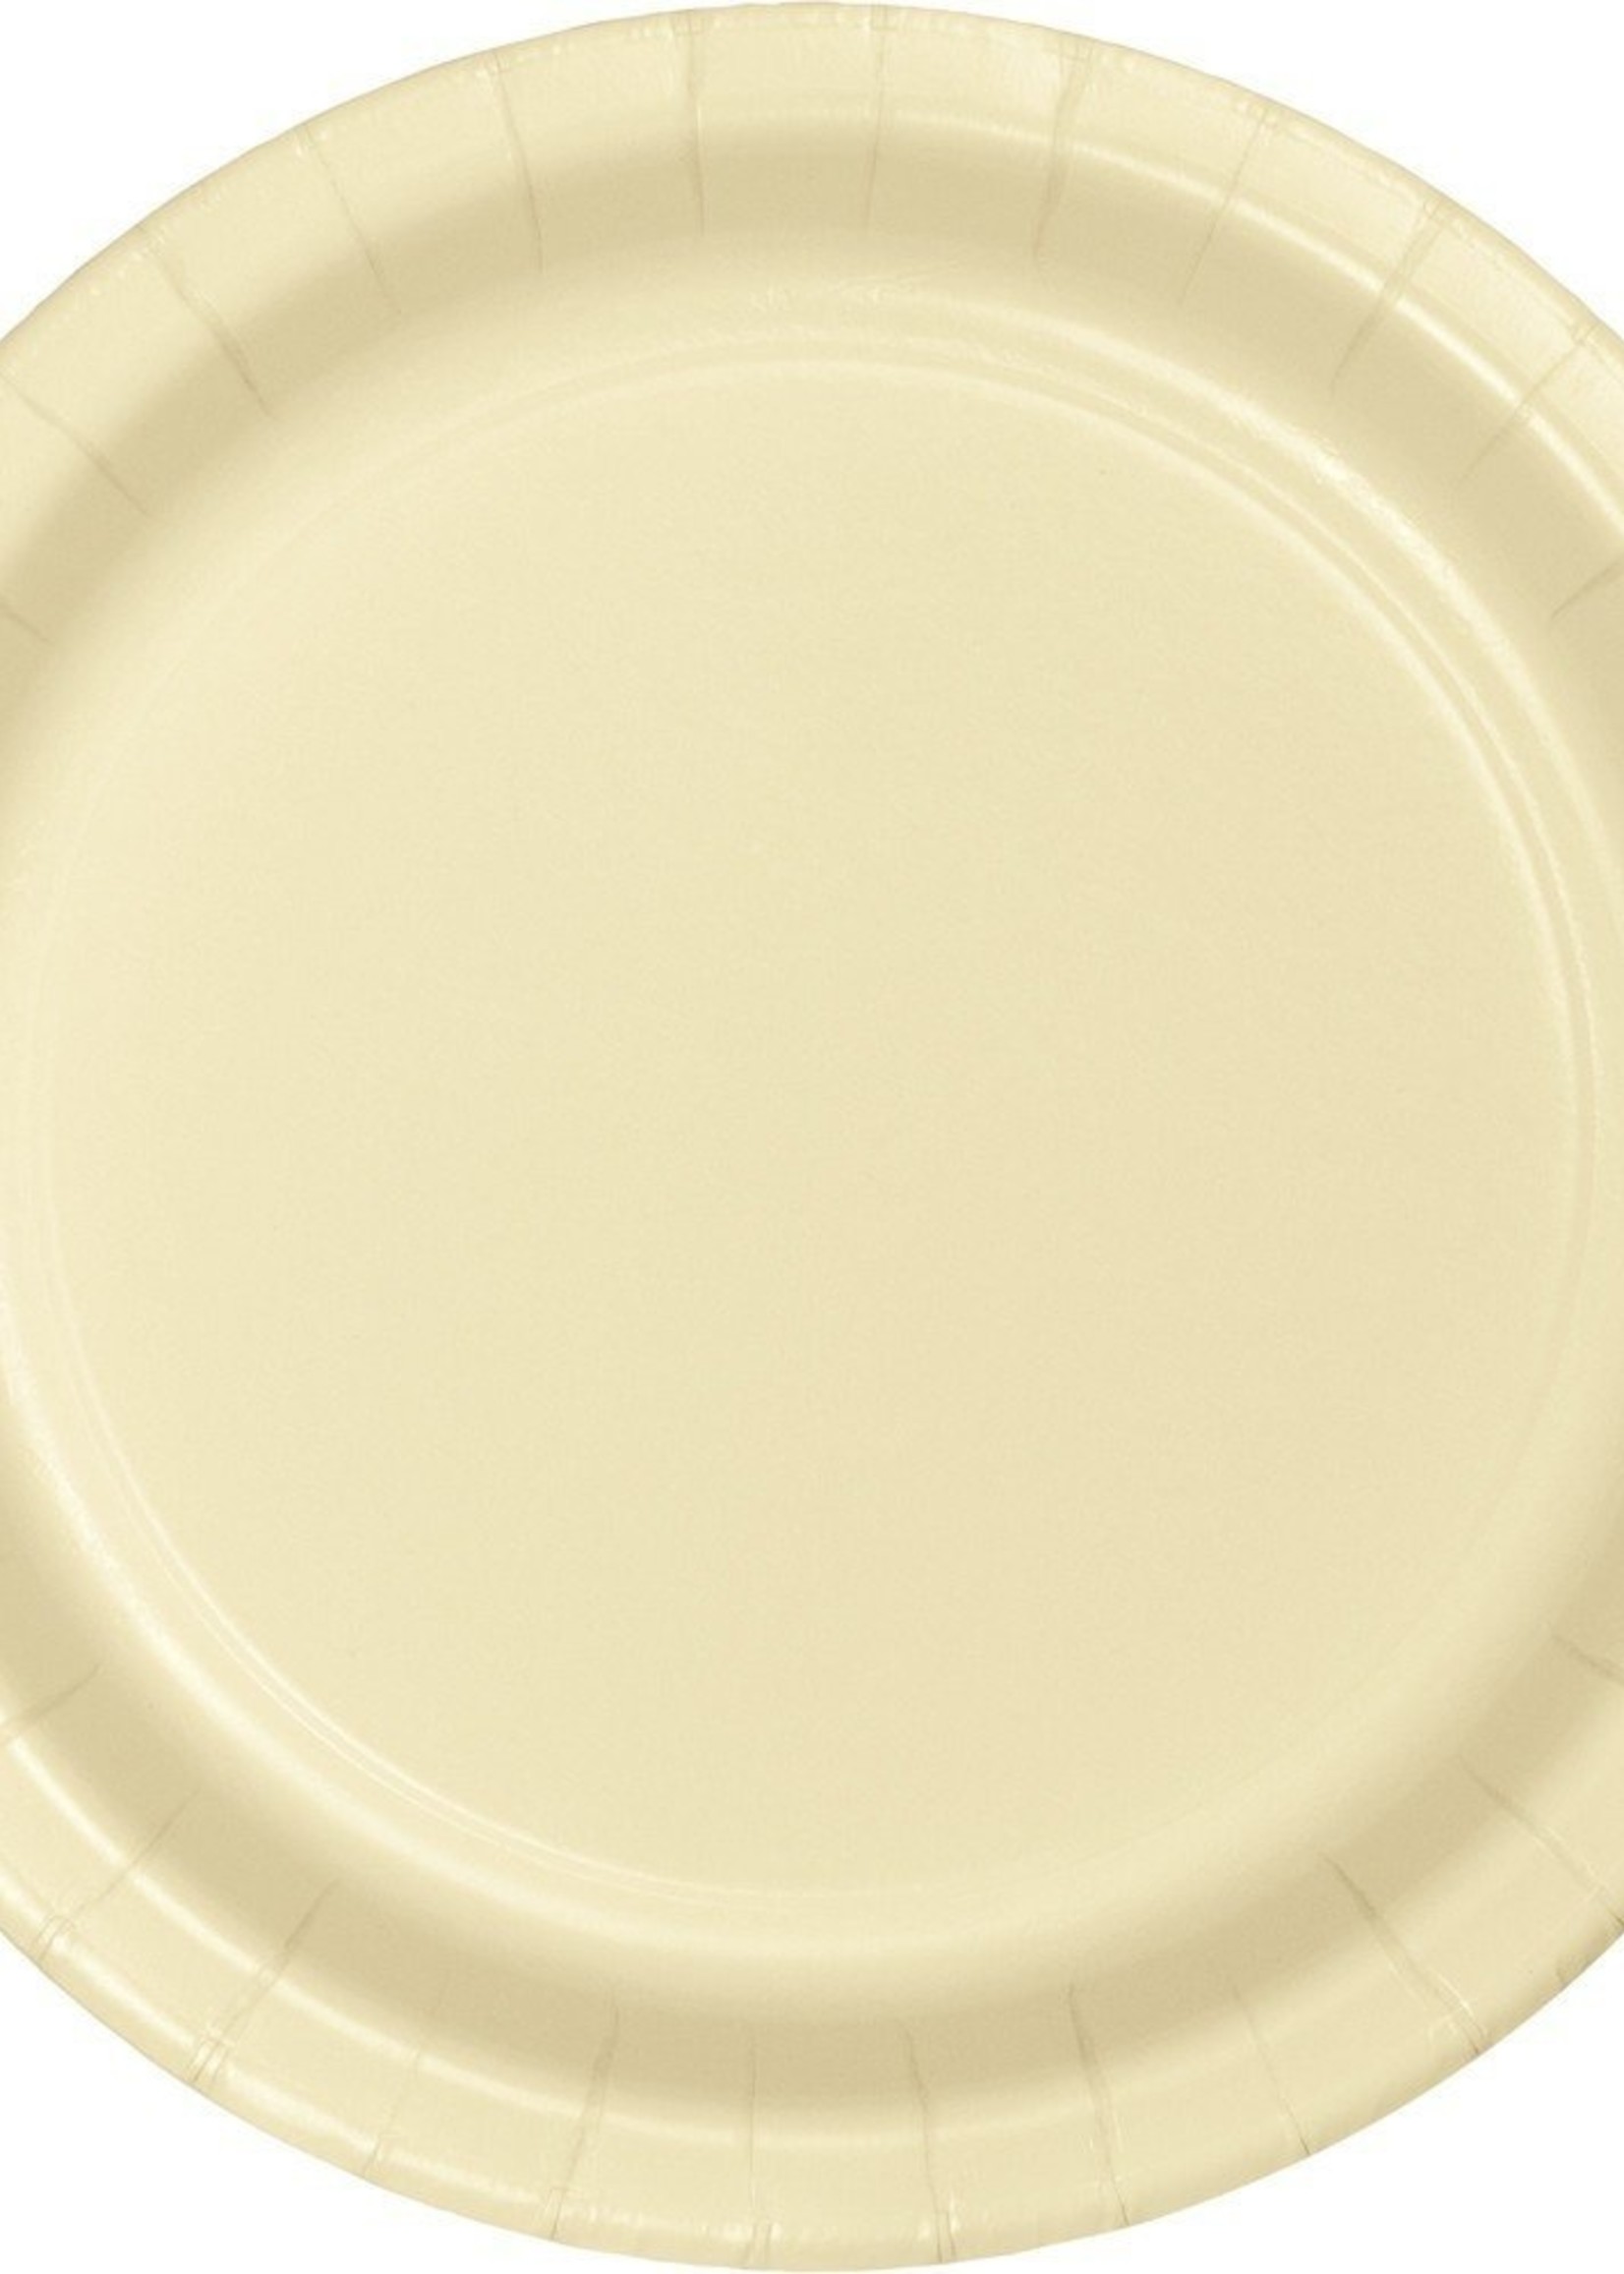 IVORY LUNCH PLATE 24ct